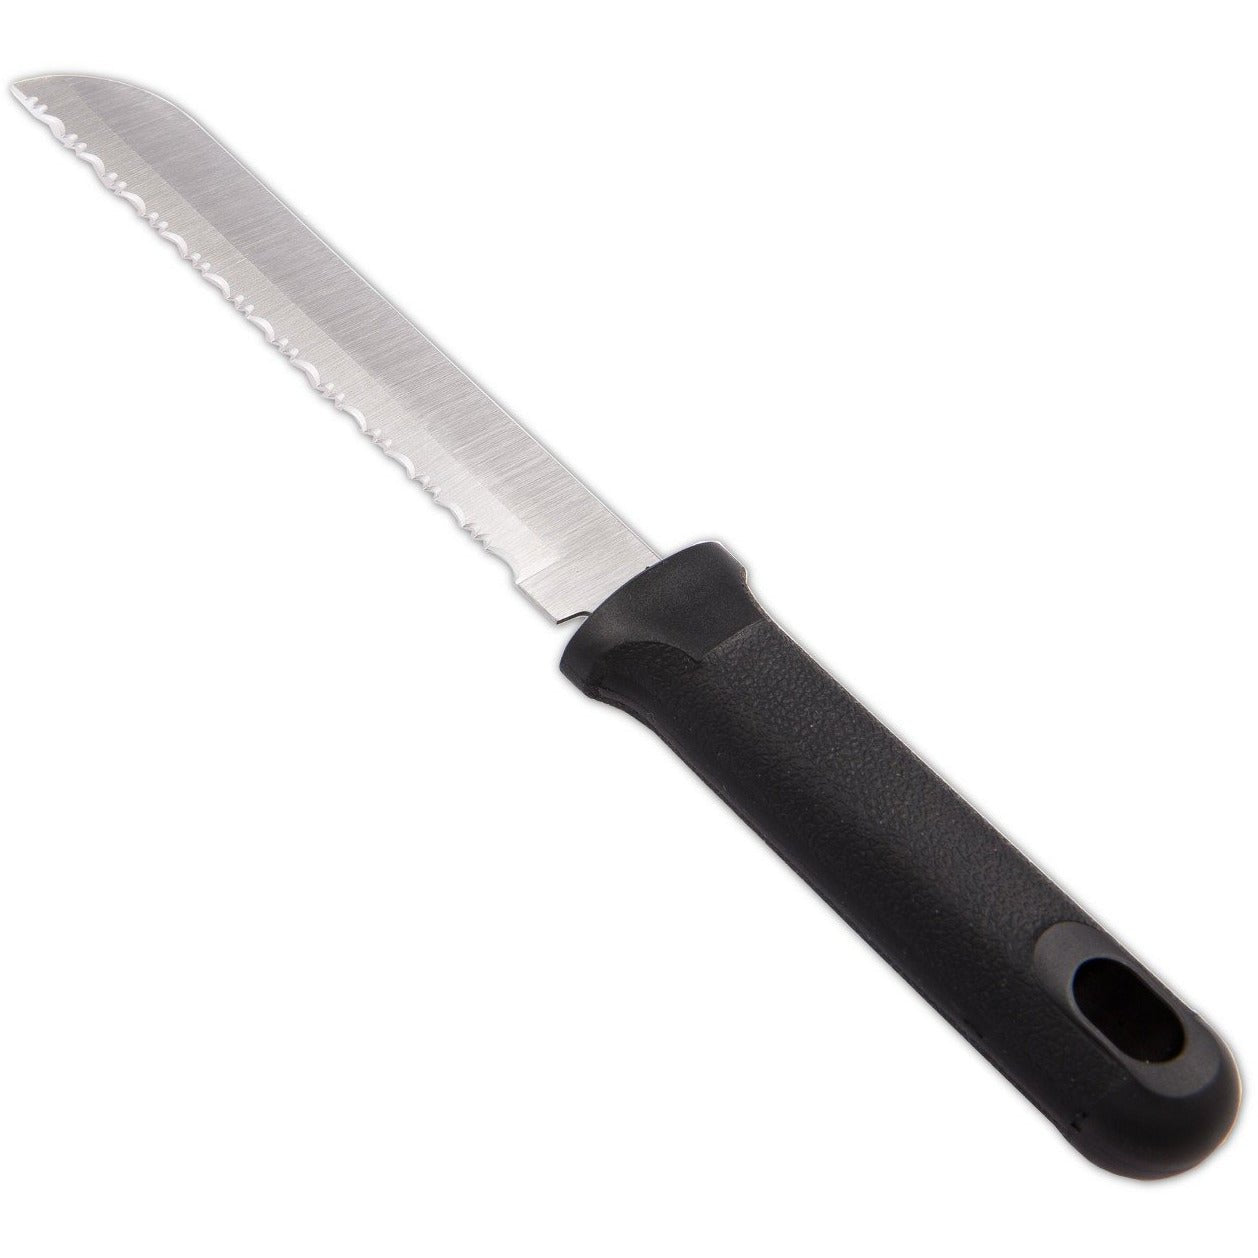 Free Gift - Superior Chef Serrated Vegetable Knife